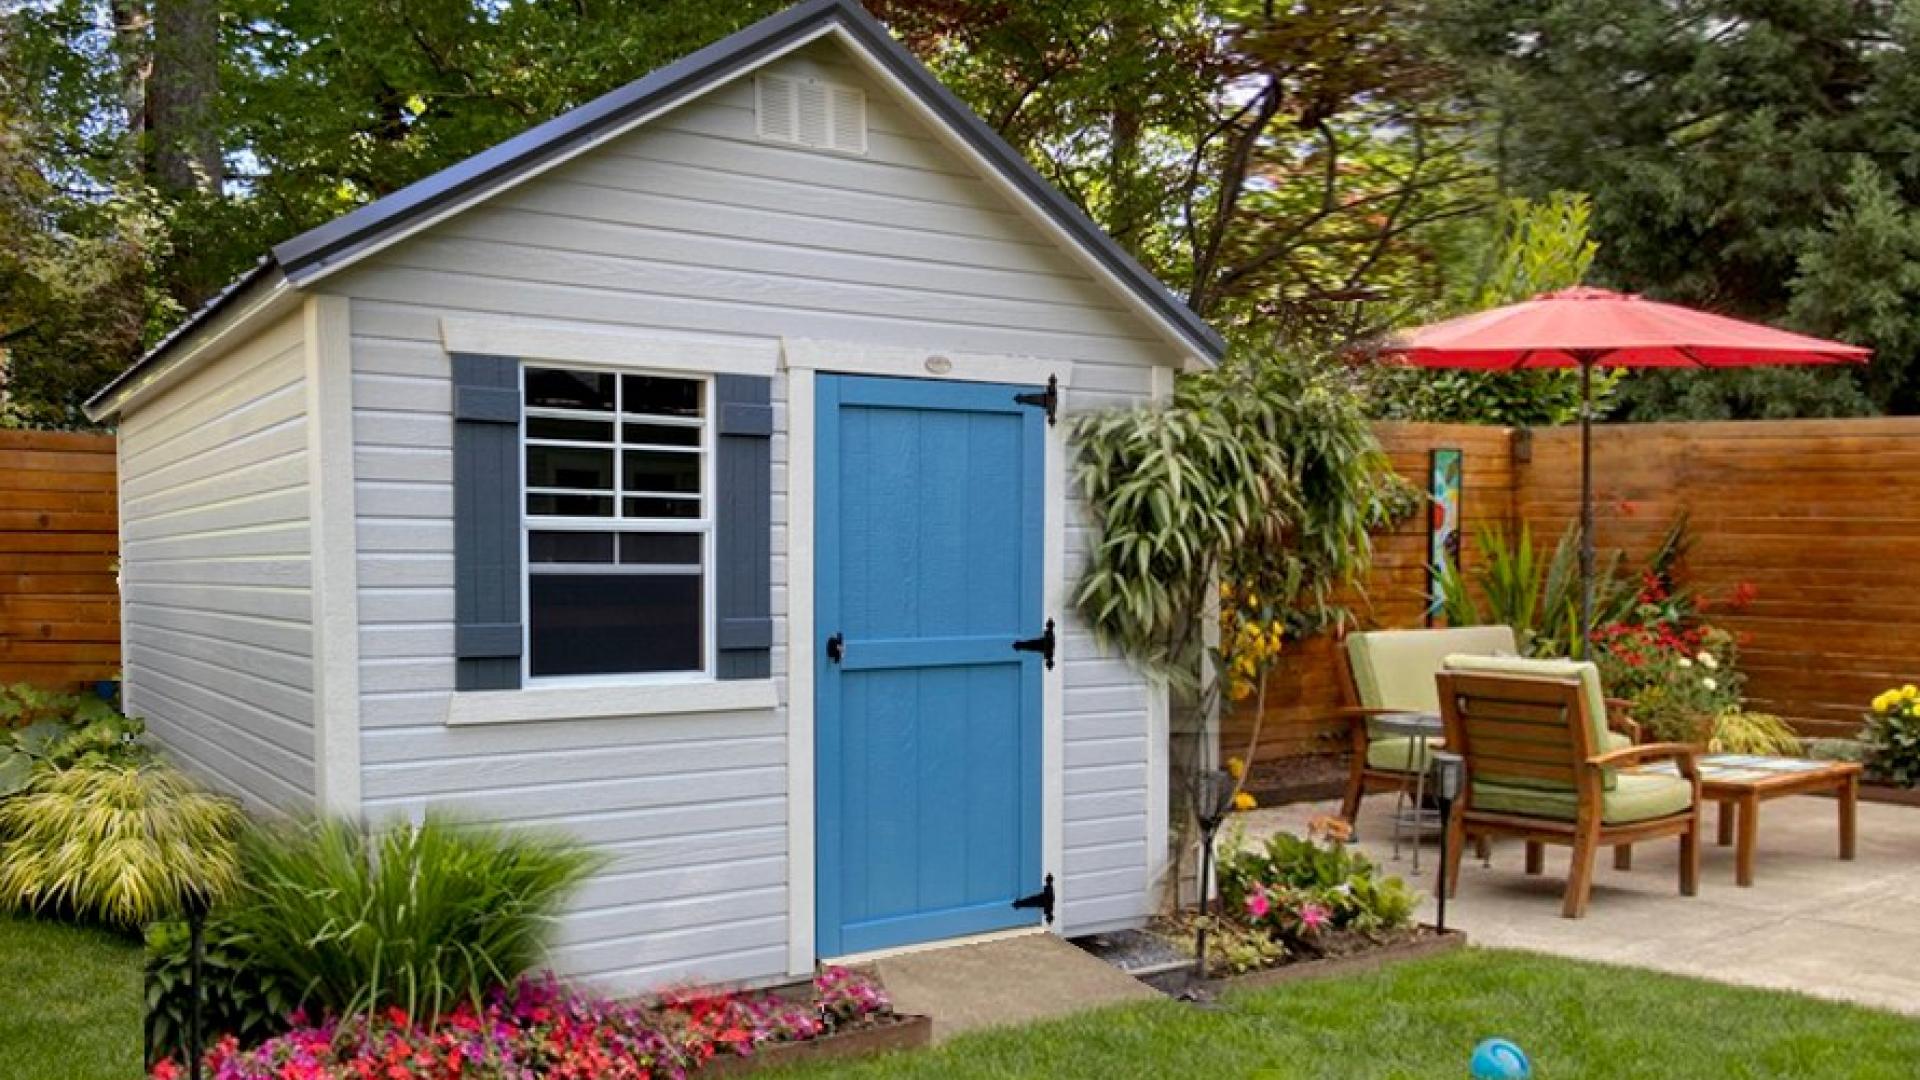 White garden shed with bright blue door in a stylish backyard